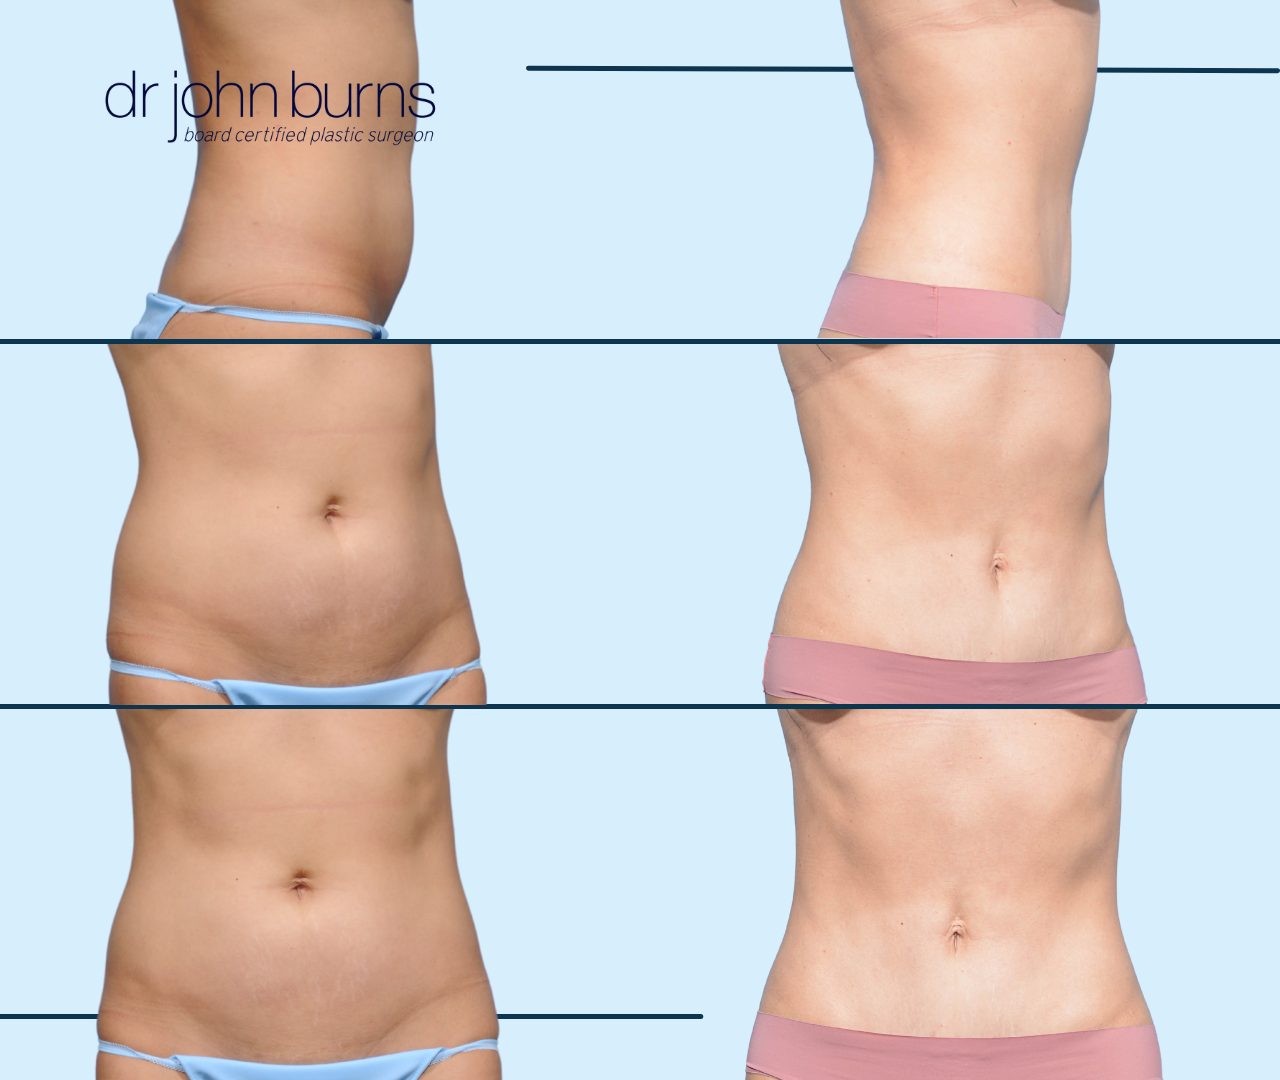 Before & After Mini Tummy Tuck with umbilical float by Dallas Tummy Tuck surgeon, Dr. John Burns